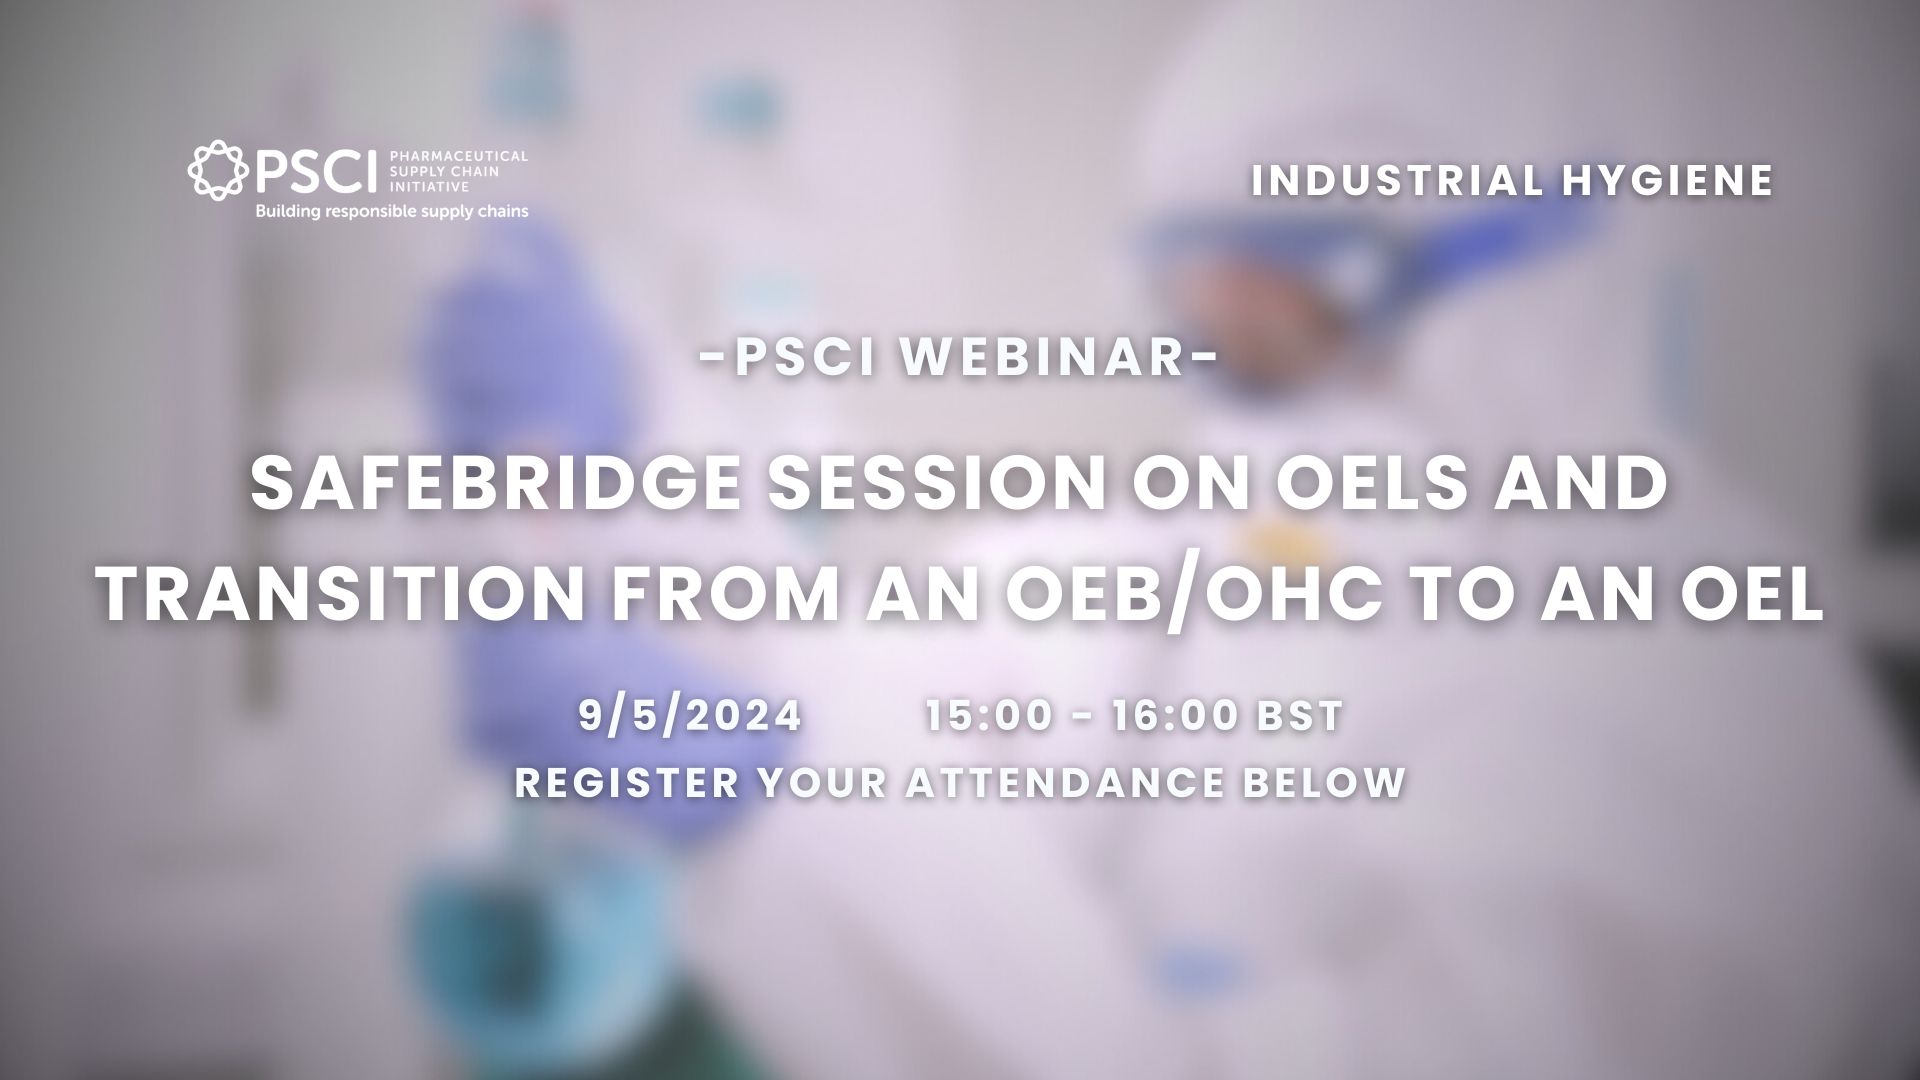 PSCI Webinar: SafeBridge Session on OELs and transition from an OEB/OHC to an OEL